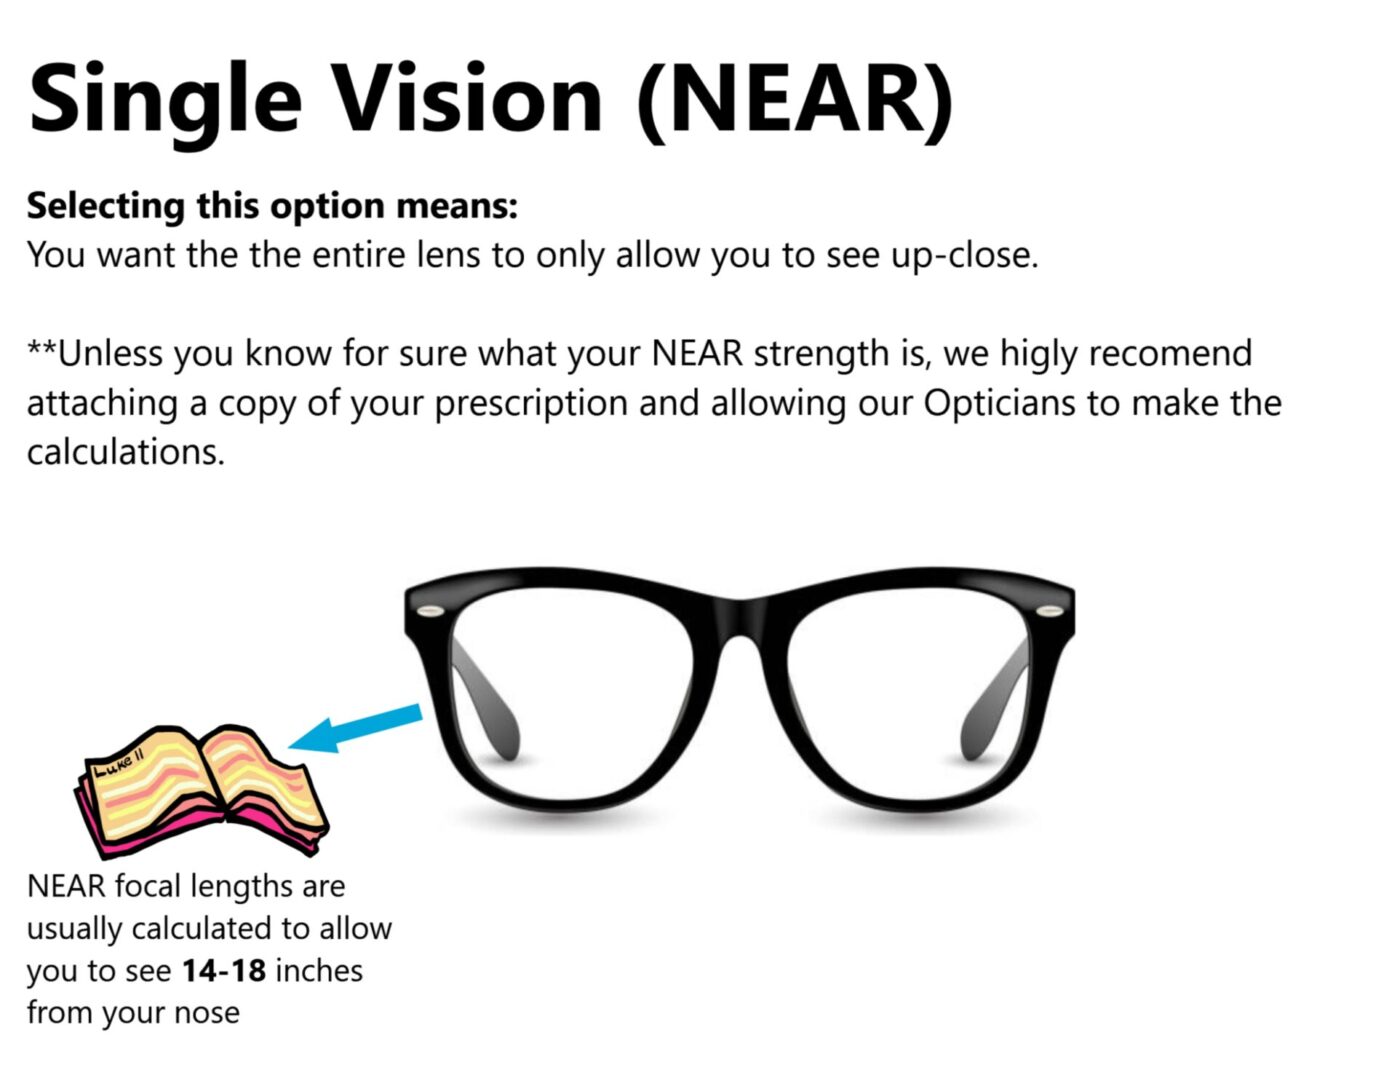 Single Vision for NEAR